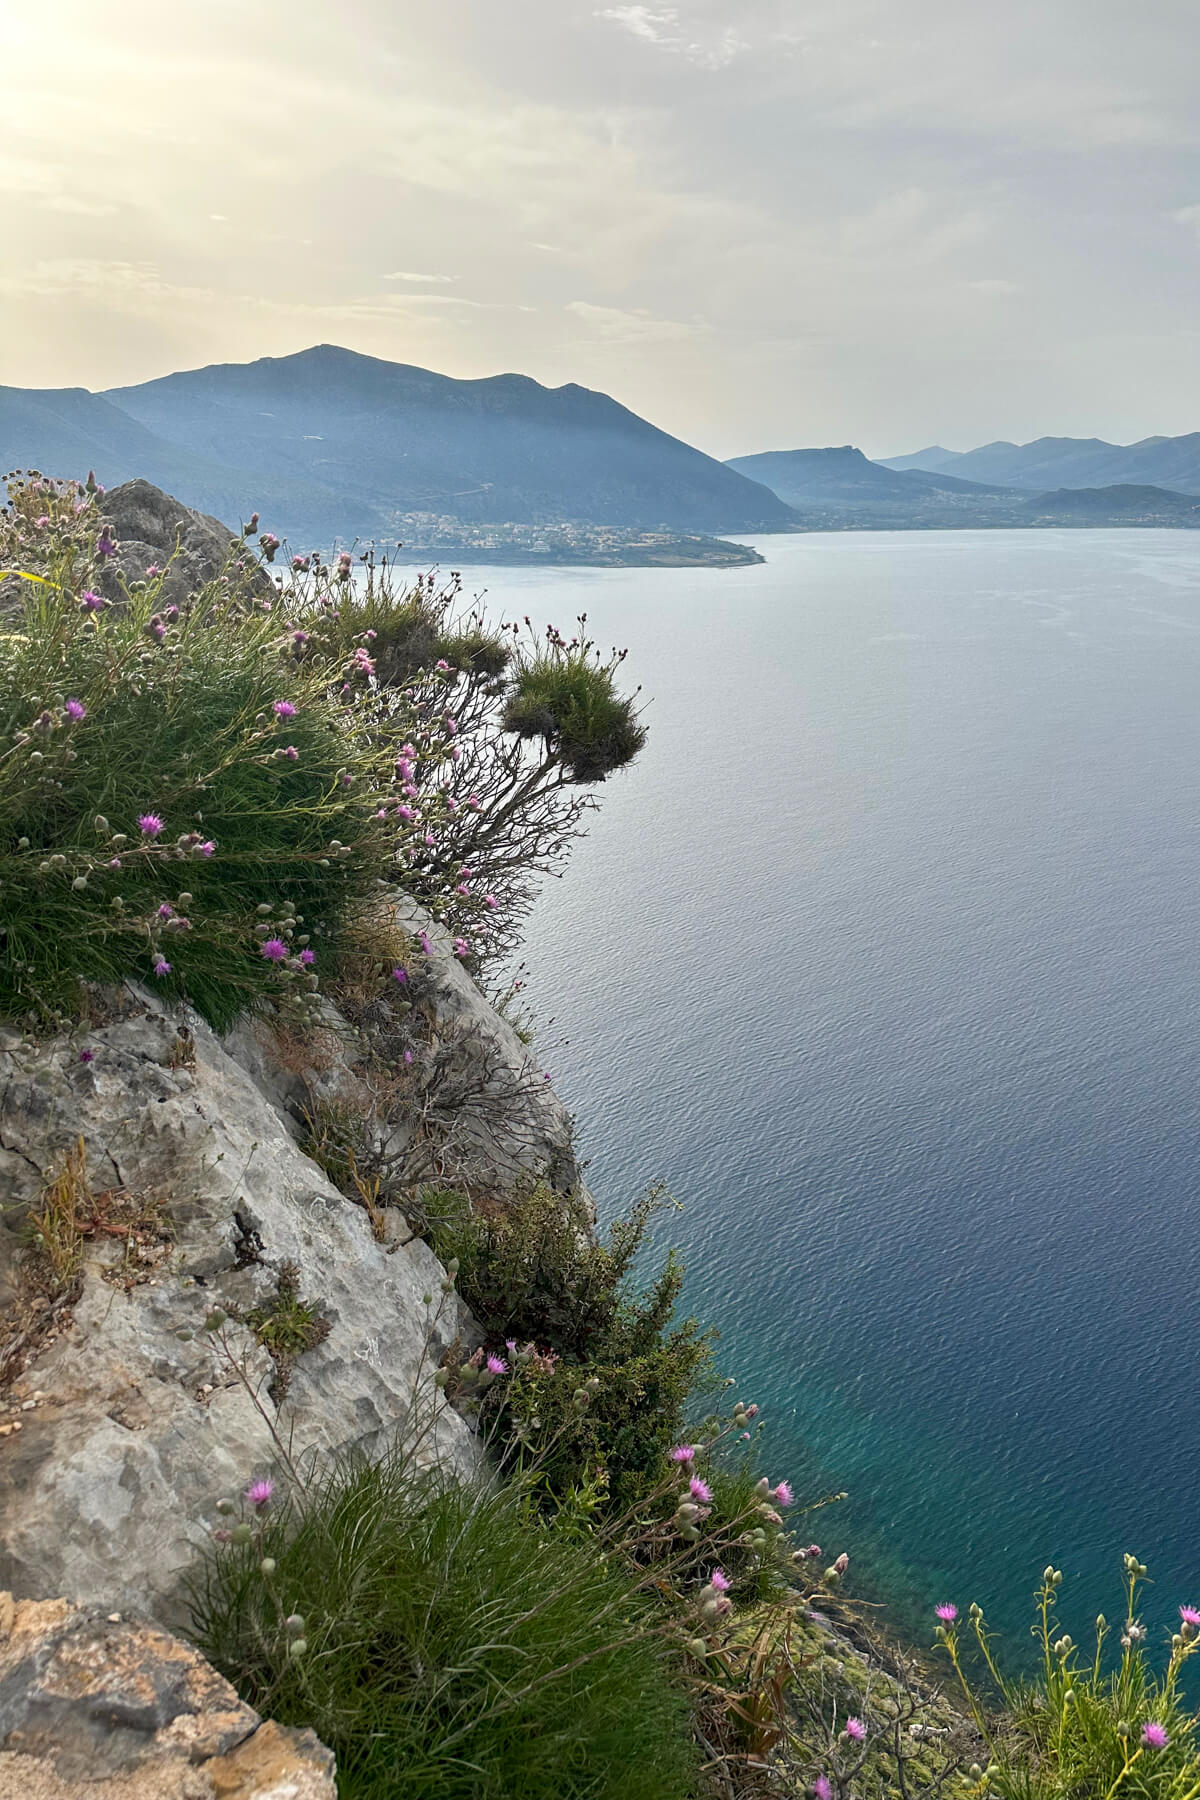 Beautiful view of the cliffside and water from Monemvasia cliffs